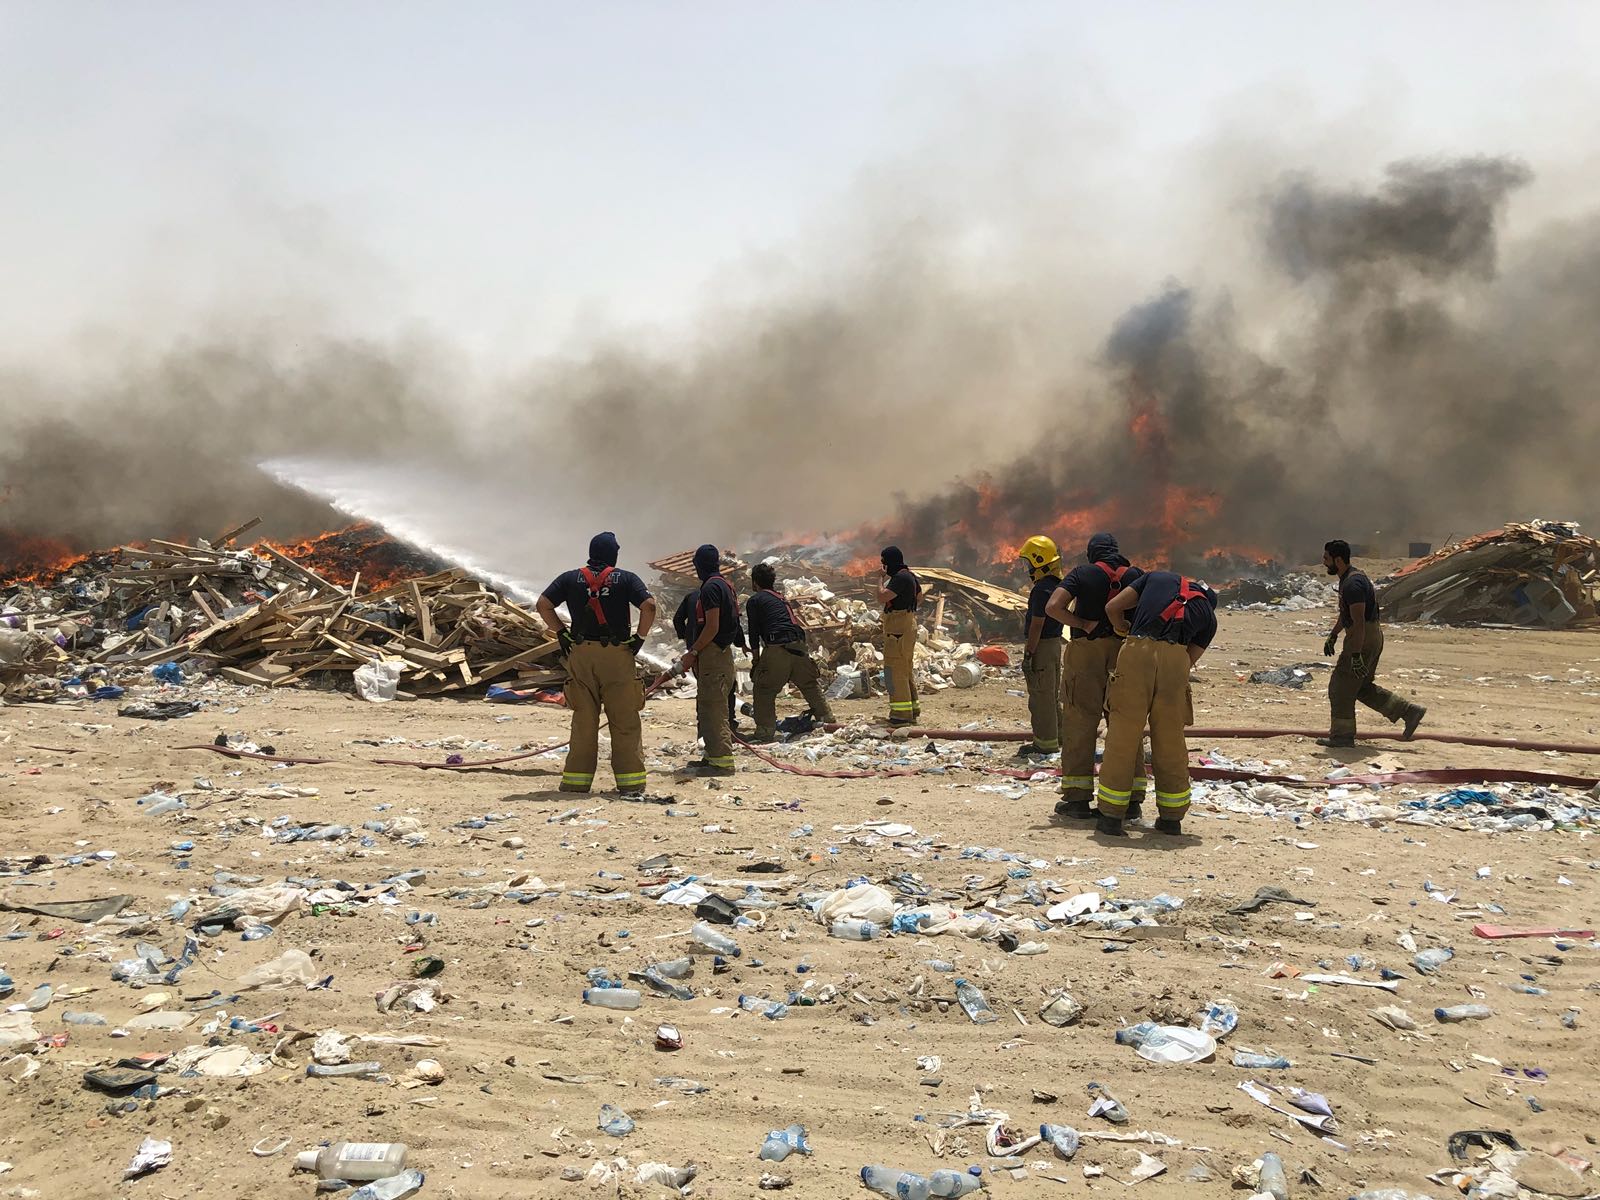 Teams of firefighters bring down the fire gutted a waste disposal plant in Western Mina Abdullah